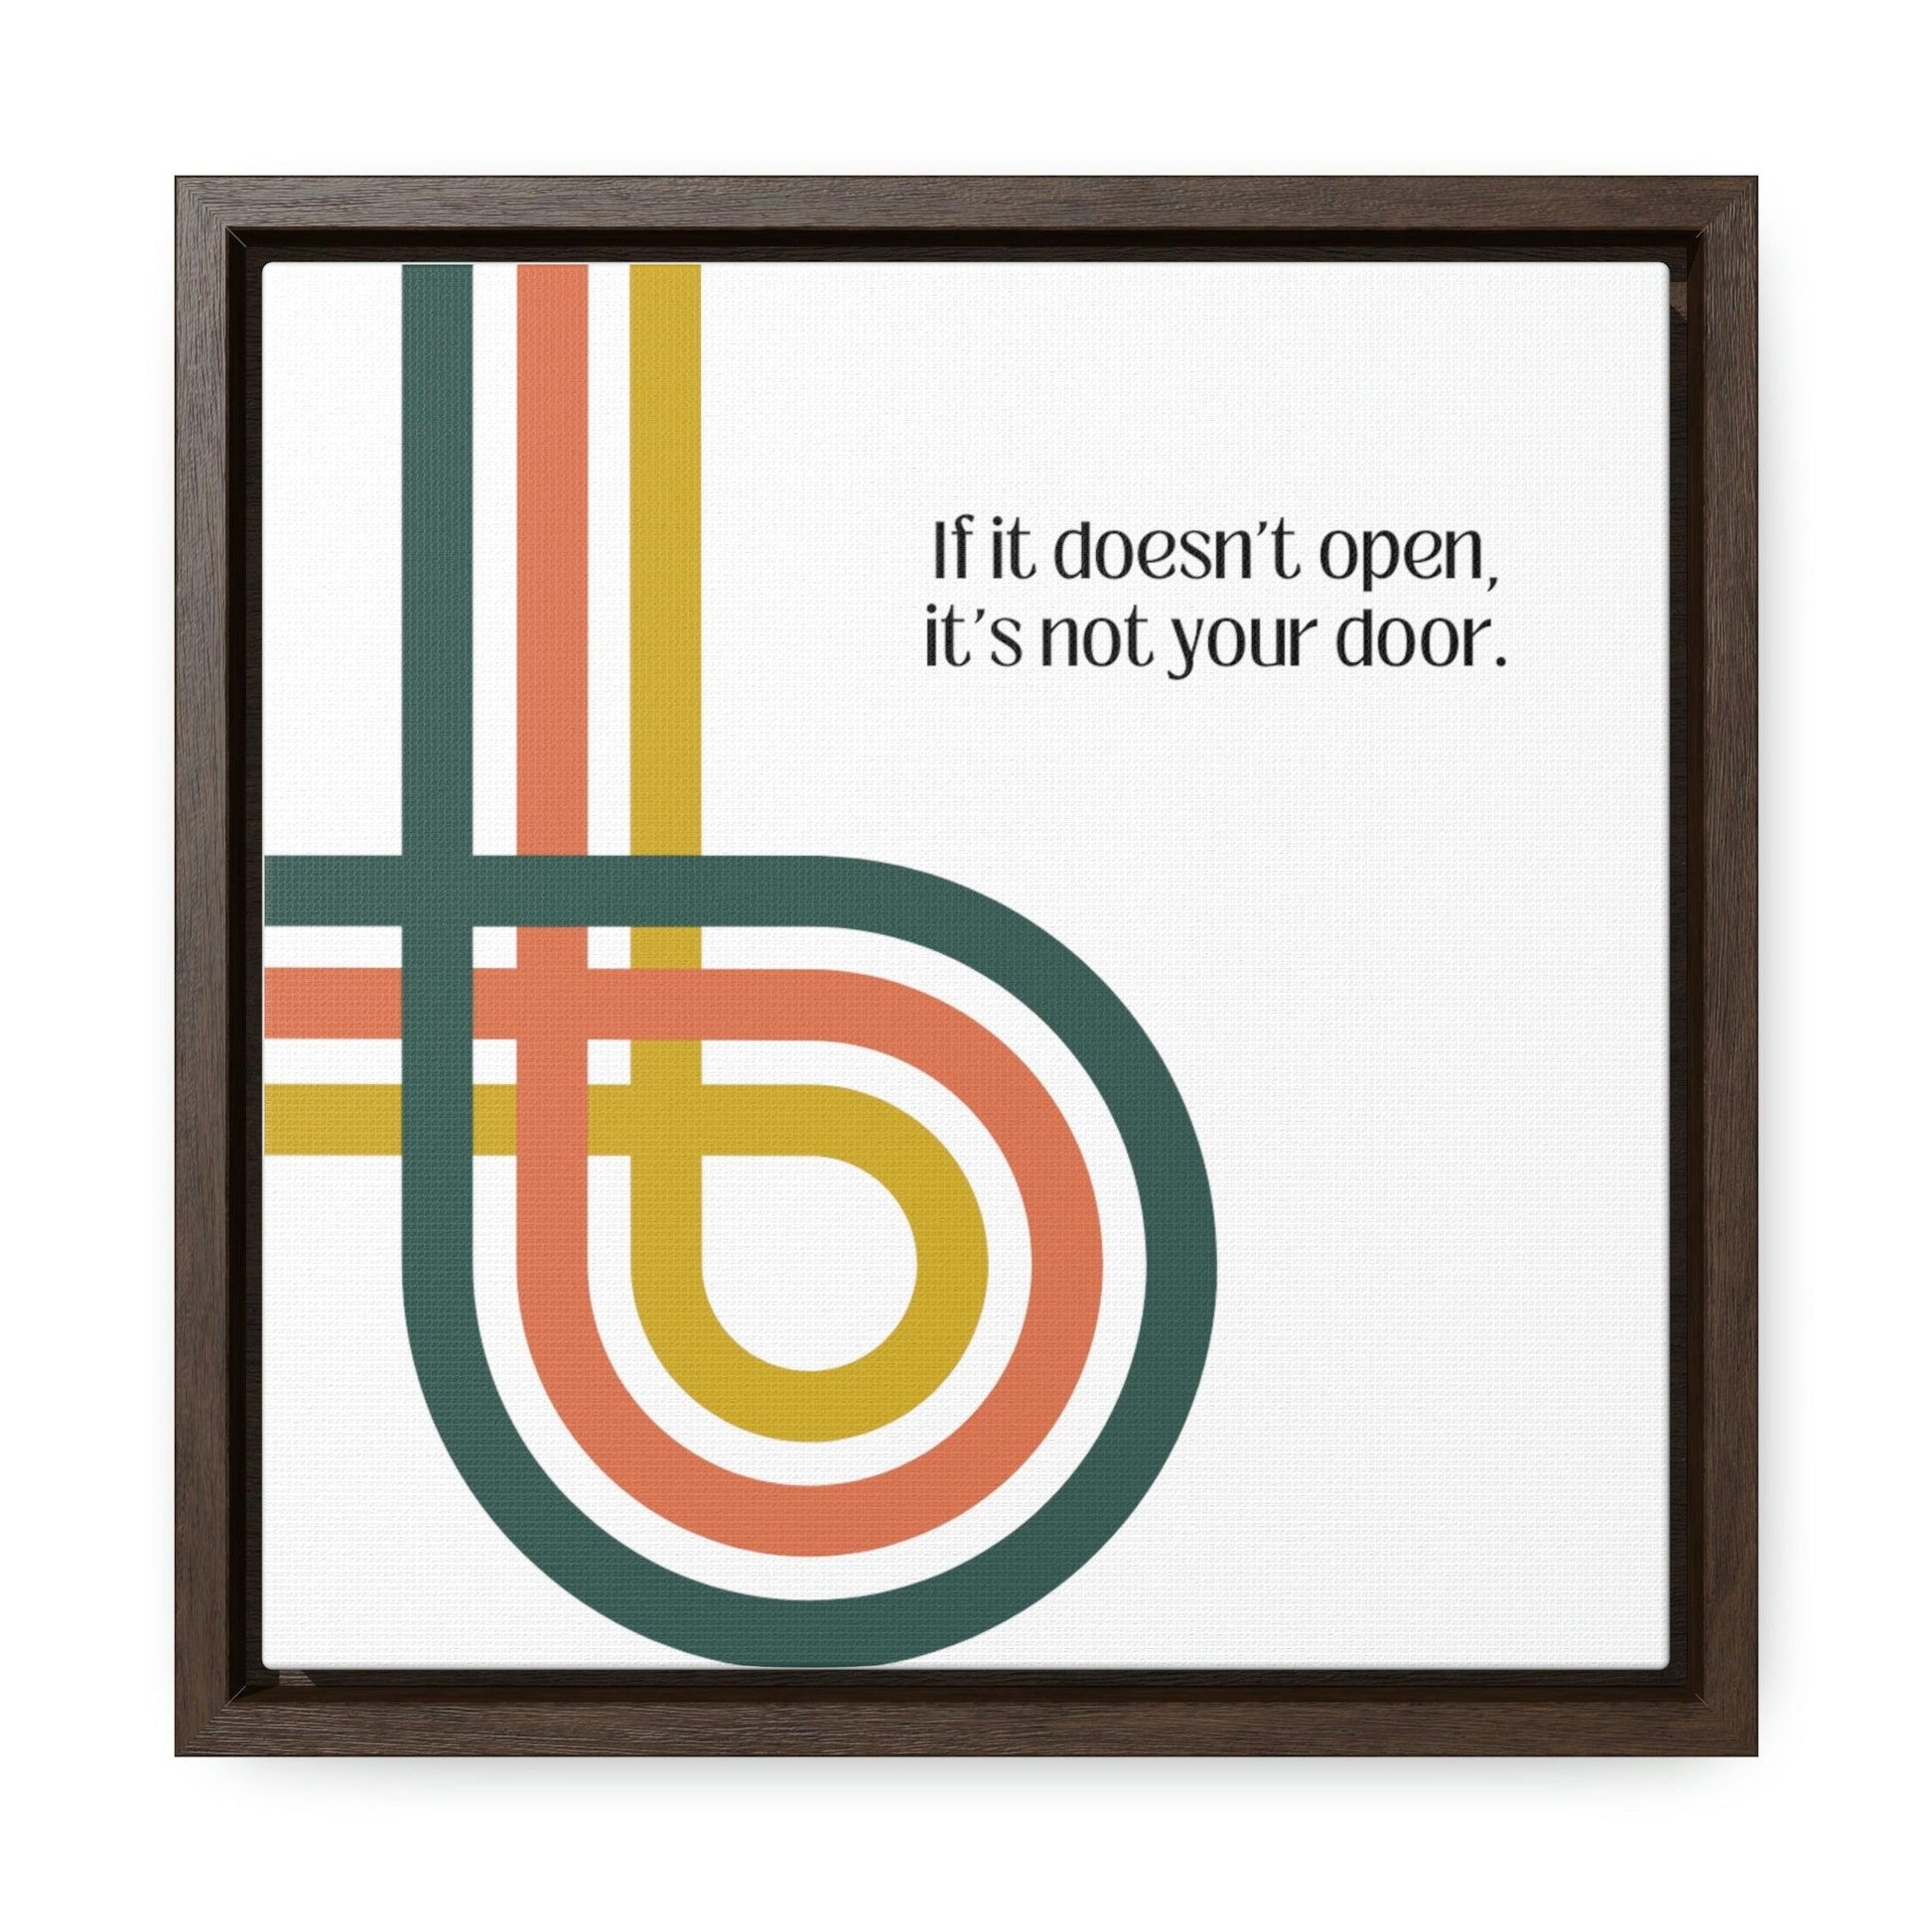 If it doesn't open, it's not your door - Gallery Canvas Wraps, Square Frame - Moxie Graphics